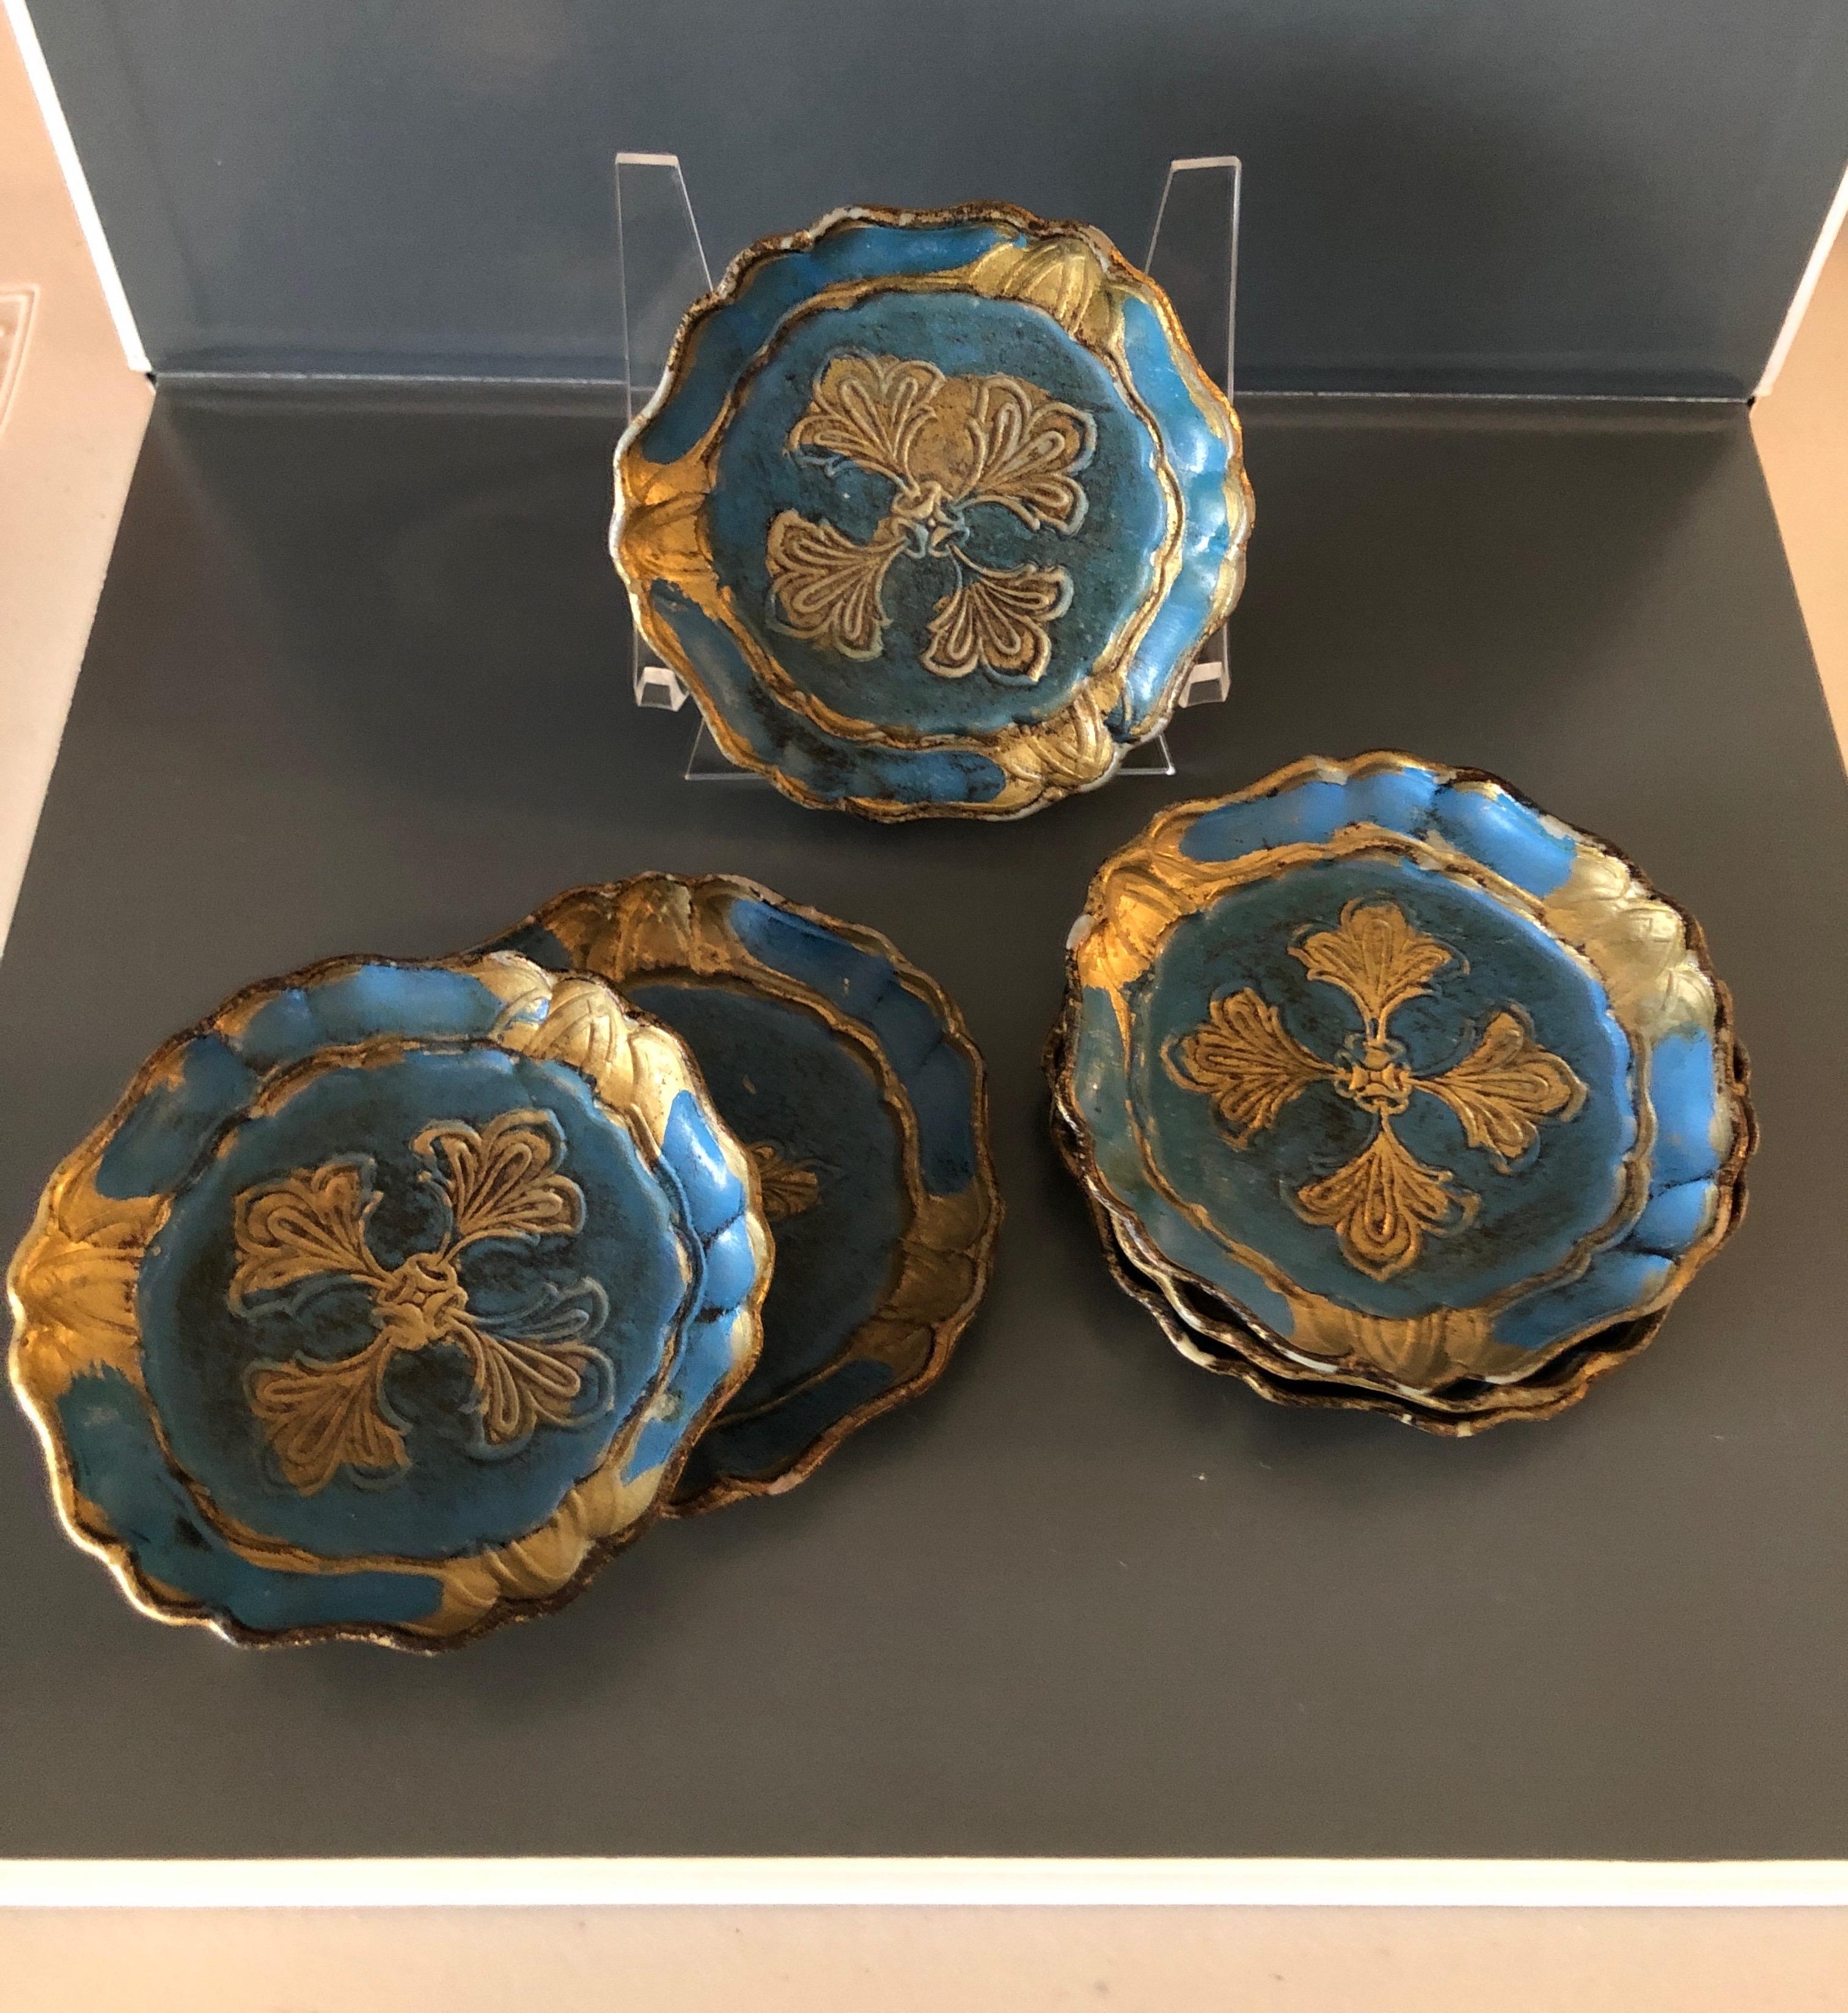 Set of (6) blue and gold vintage Florentine style coasters
Size: 3.5